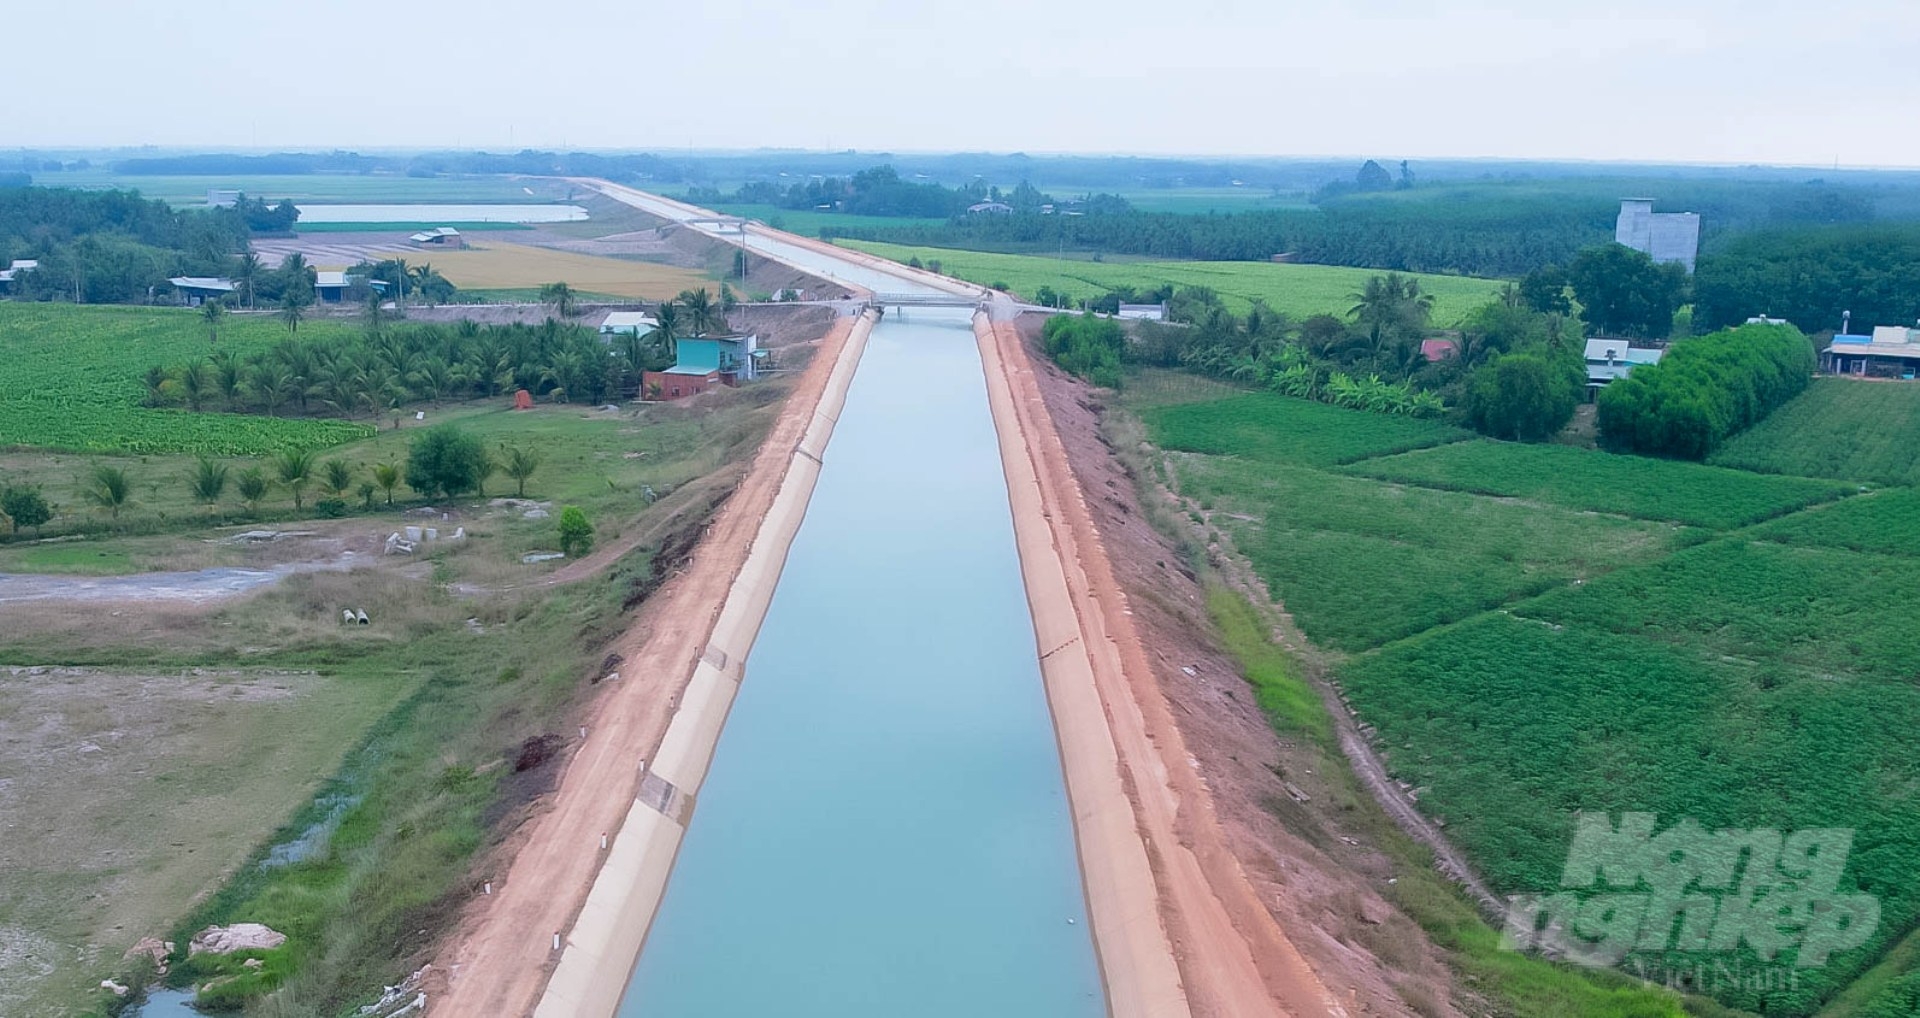 Tay Ninh has a dense, well-organized and responsive irrigation canal system for most of the arable land in the province. Photo: Le Binh.